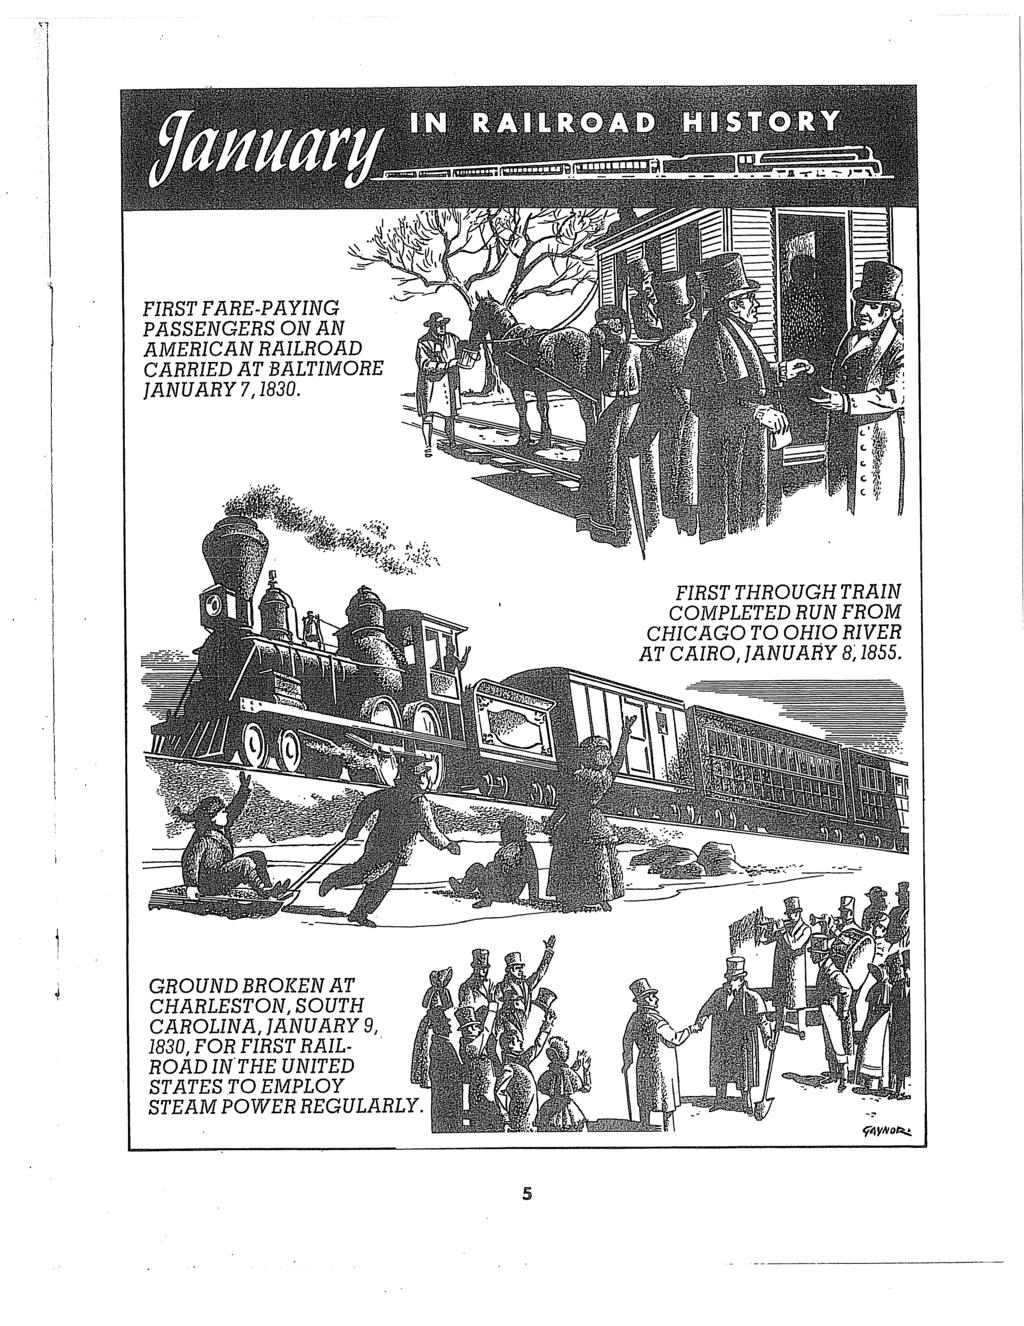 FIRST FARE-PAYING PASSENGERS ON AN AMERICAN RAILROAD CARRIED AT BALTIMORE JANUARY 7,1830.